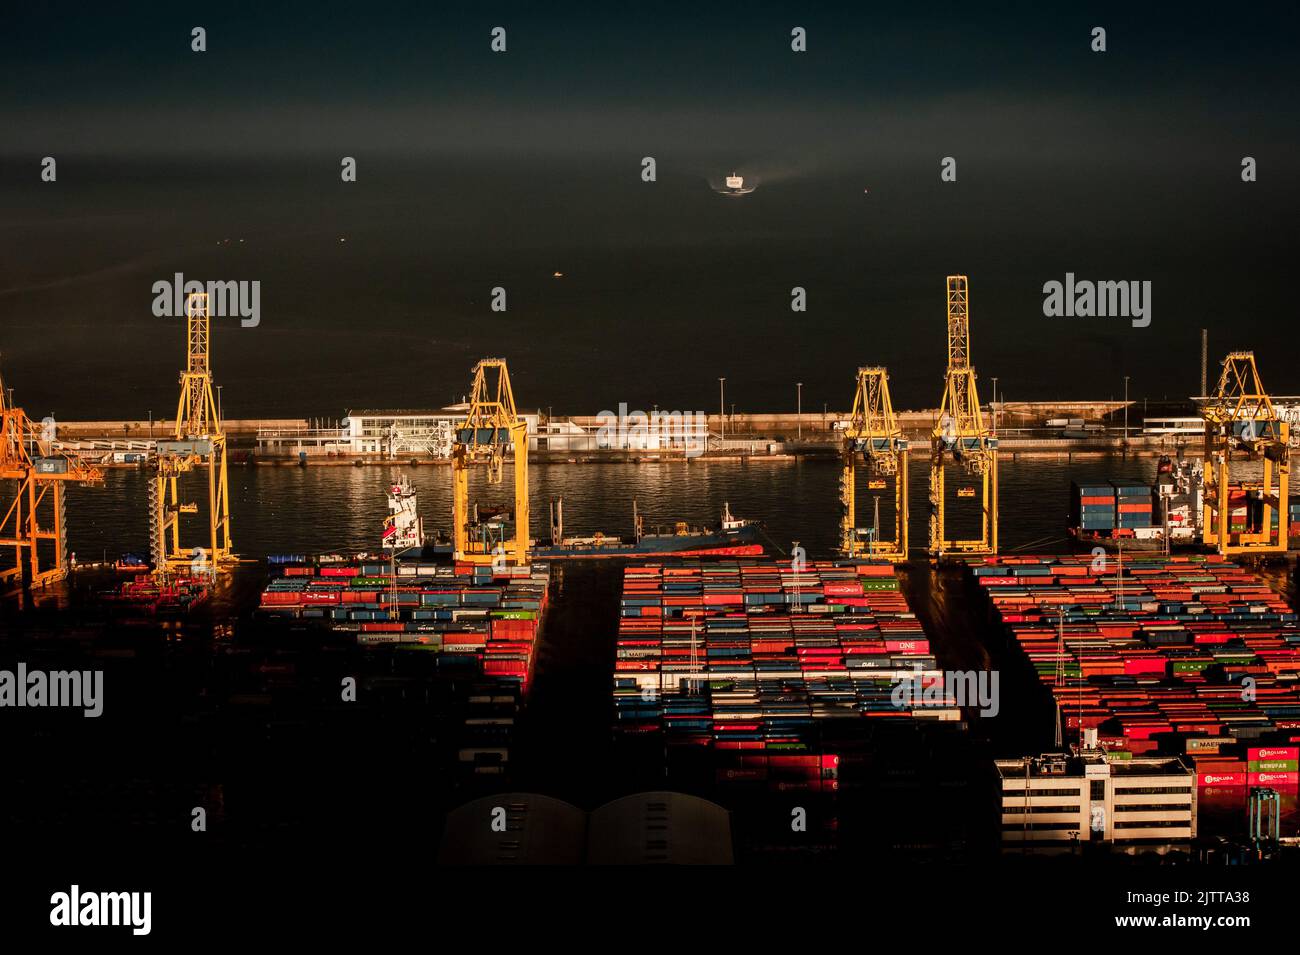 Shipping containers stored in the Port of Barcelona. Stock Photo